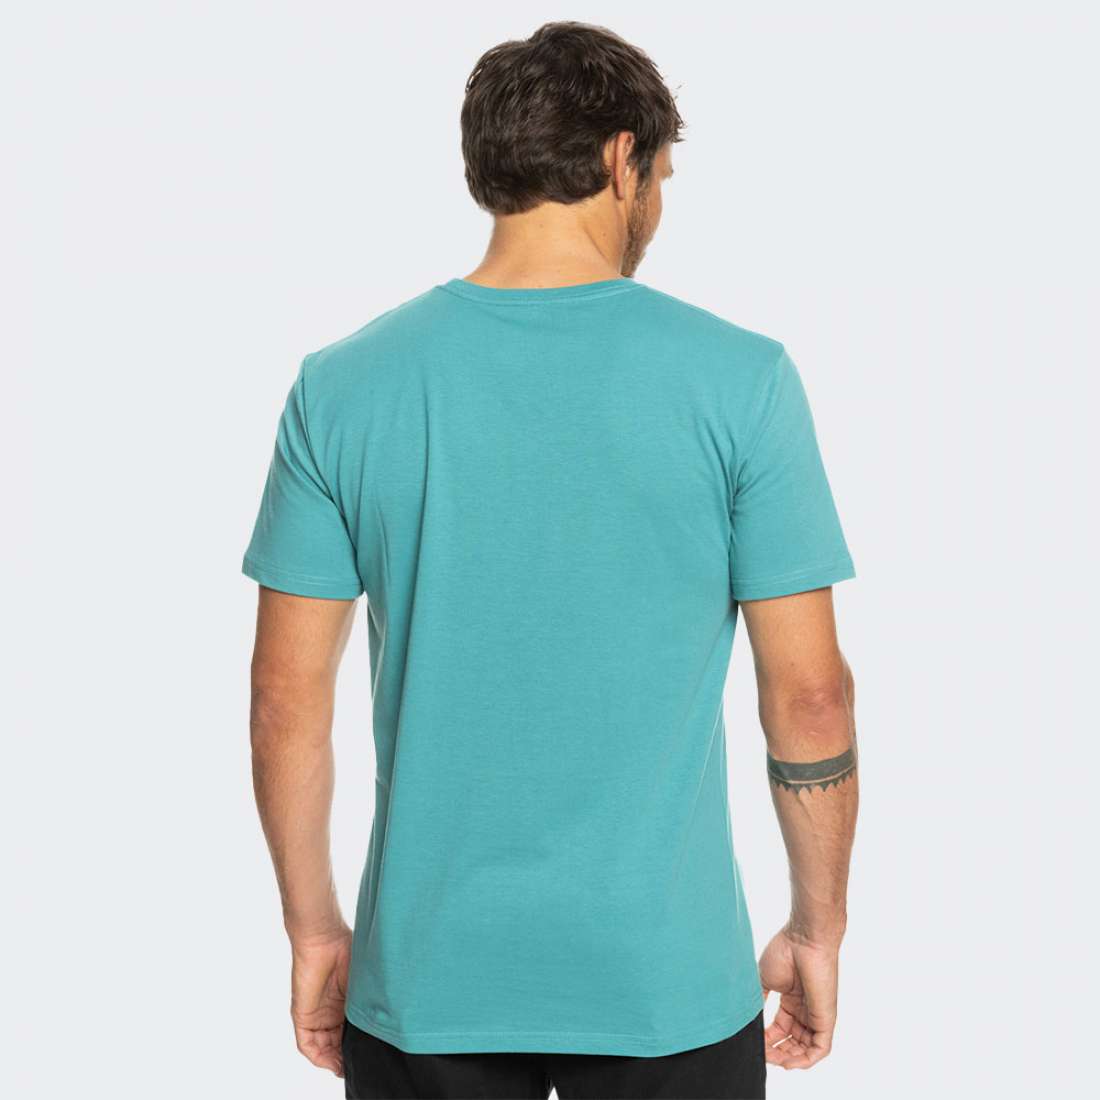 TSHIRT QUIKSILVER BETWEEN THE LINES BRITTANY BLUE